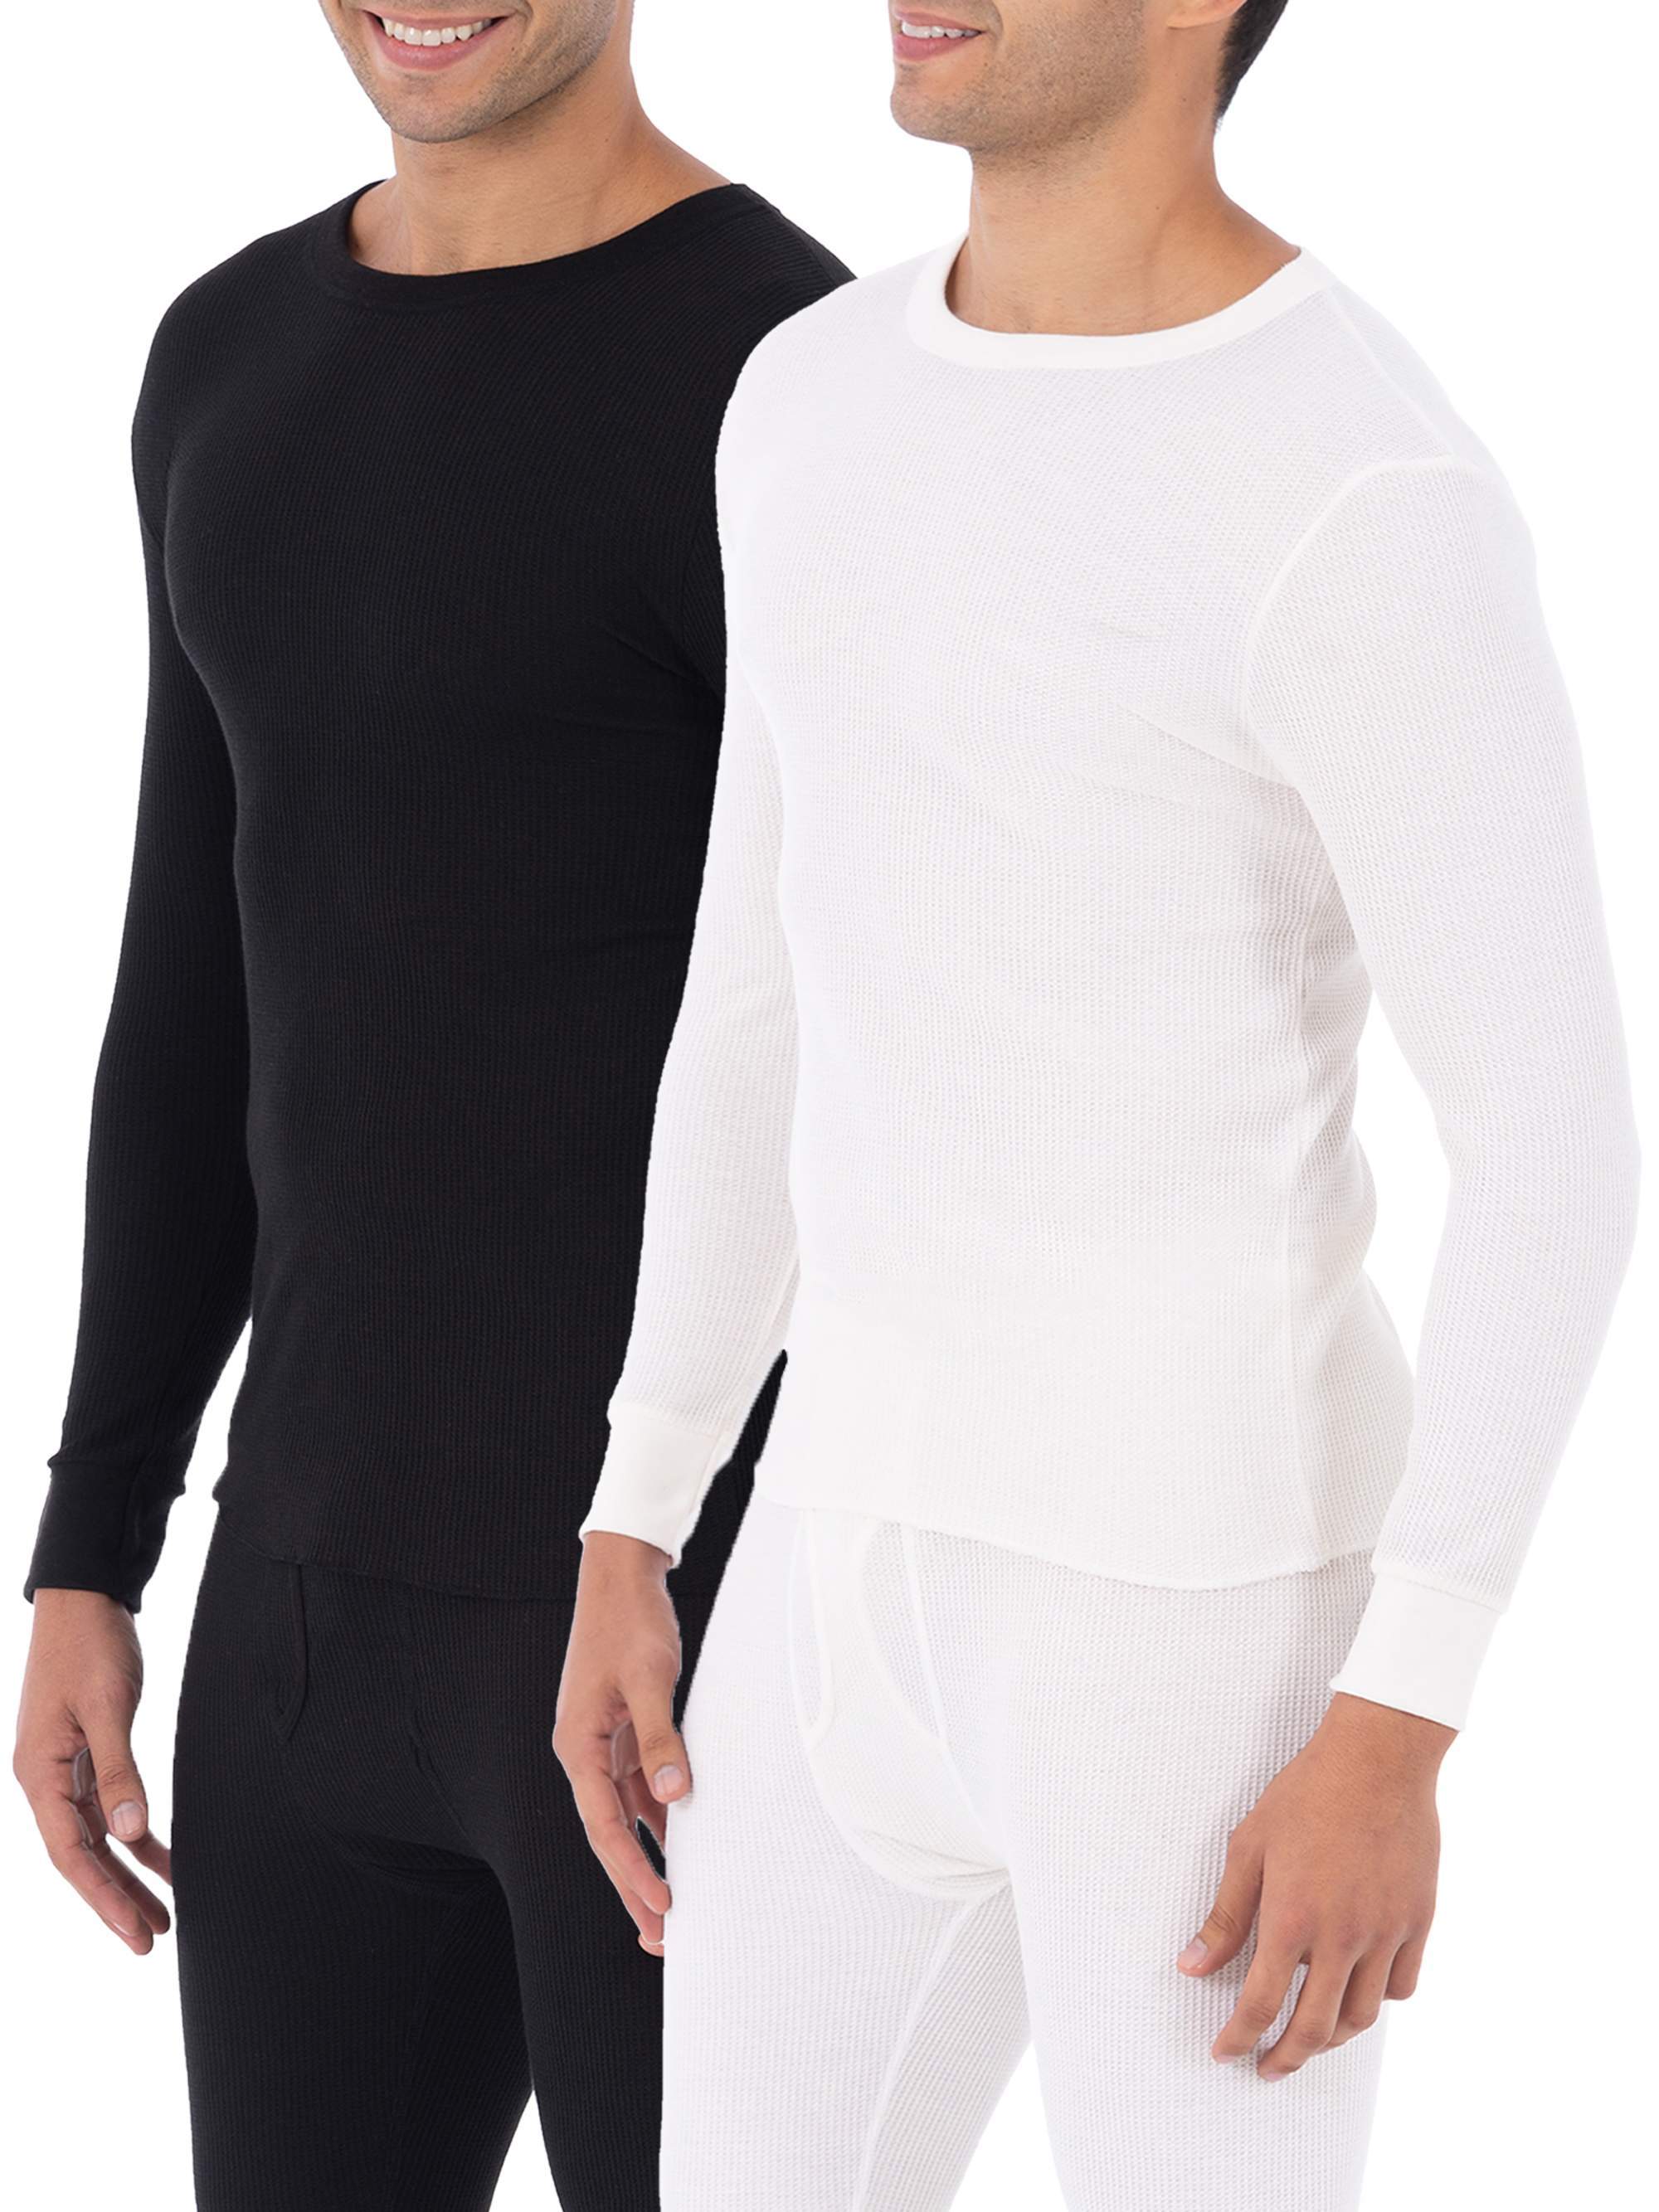 Top and Bottom Fruit of the Loom mens Recycled Waffle Thermal Underwear Set 